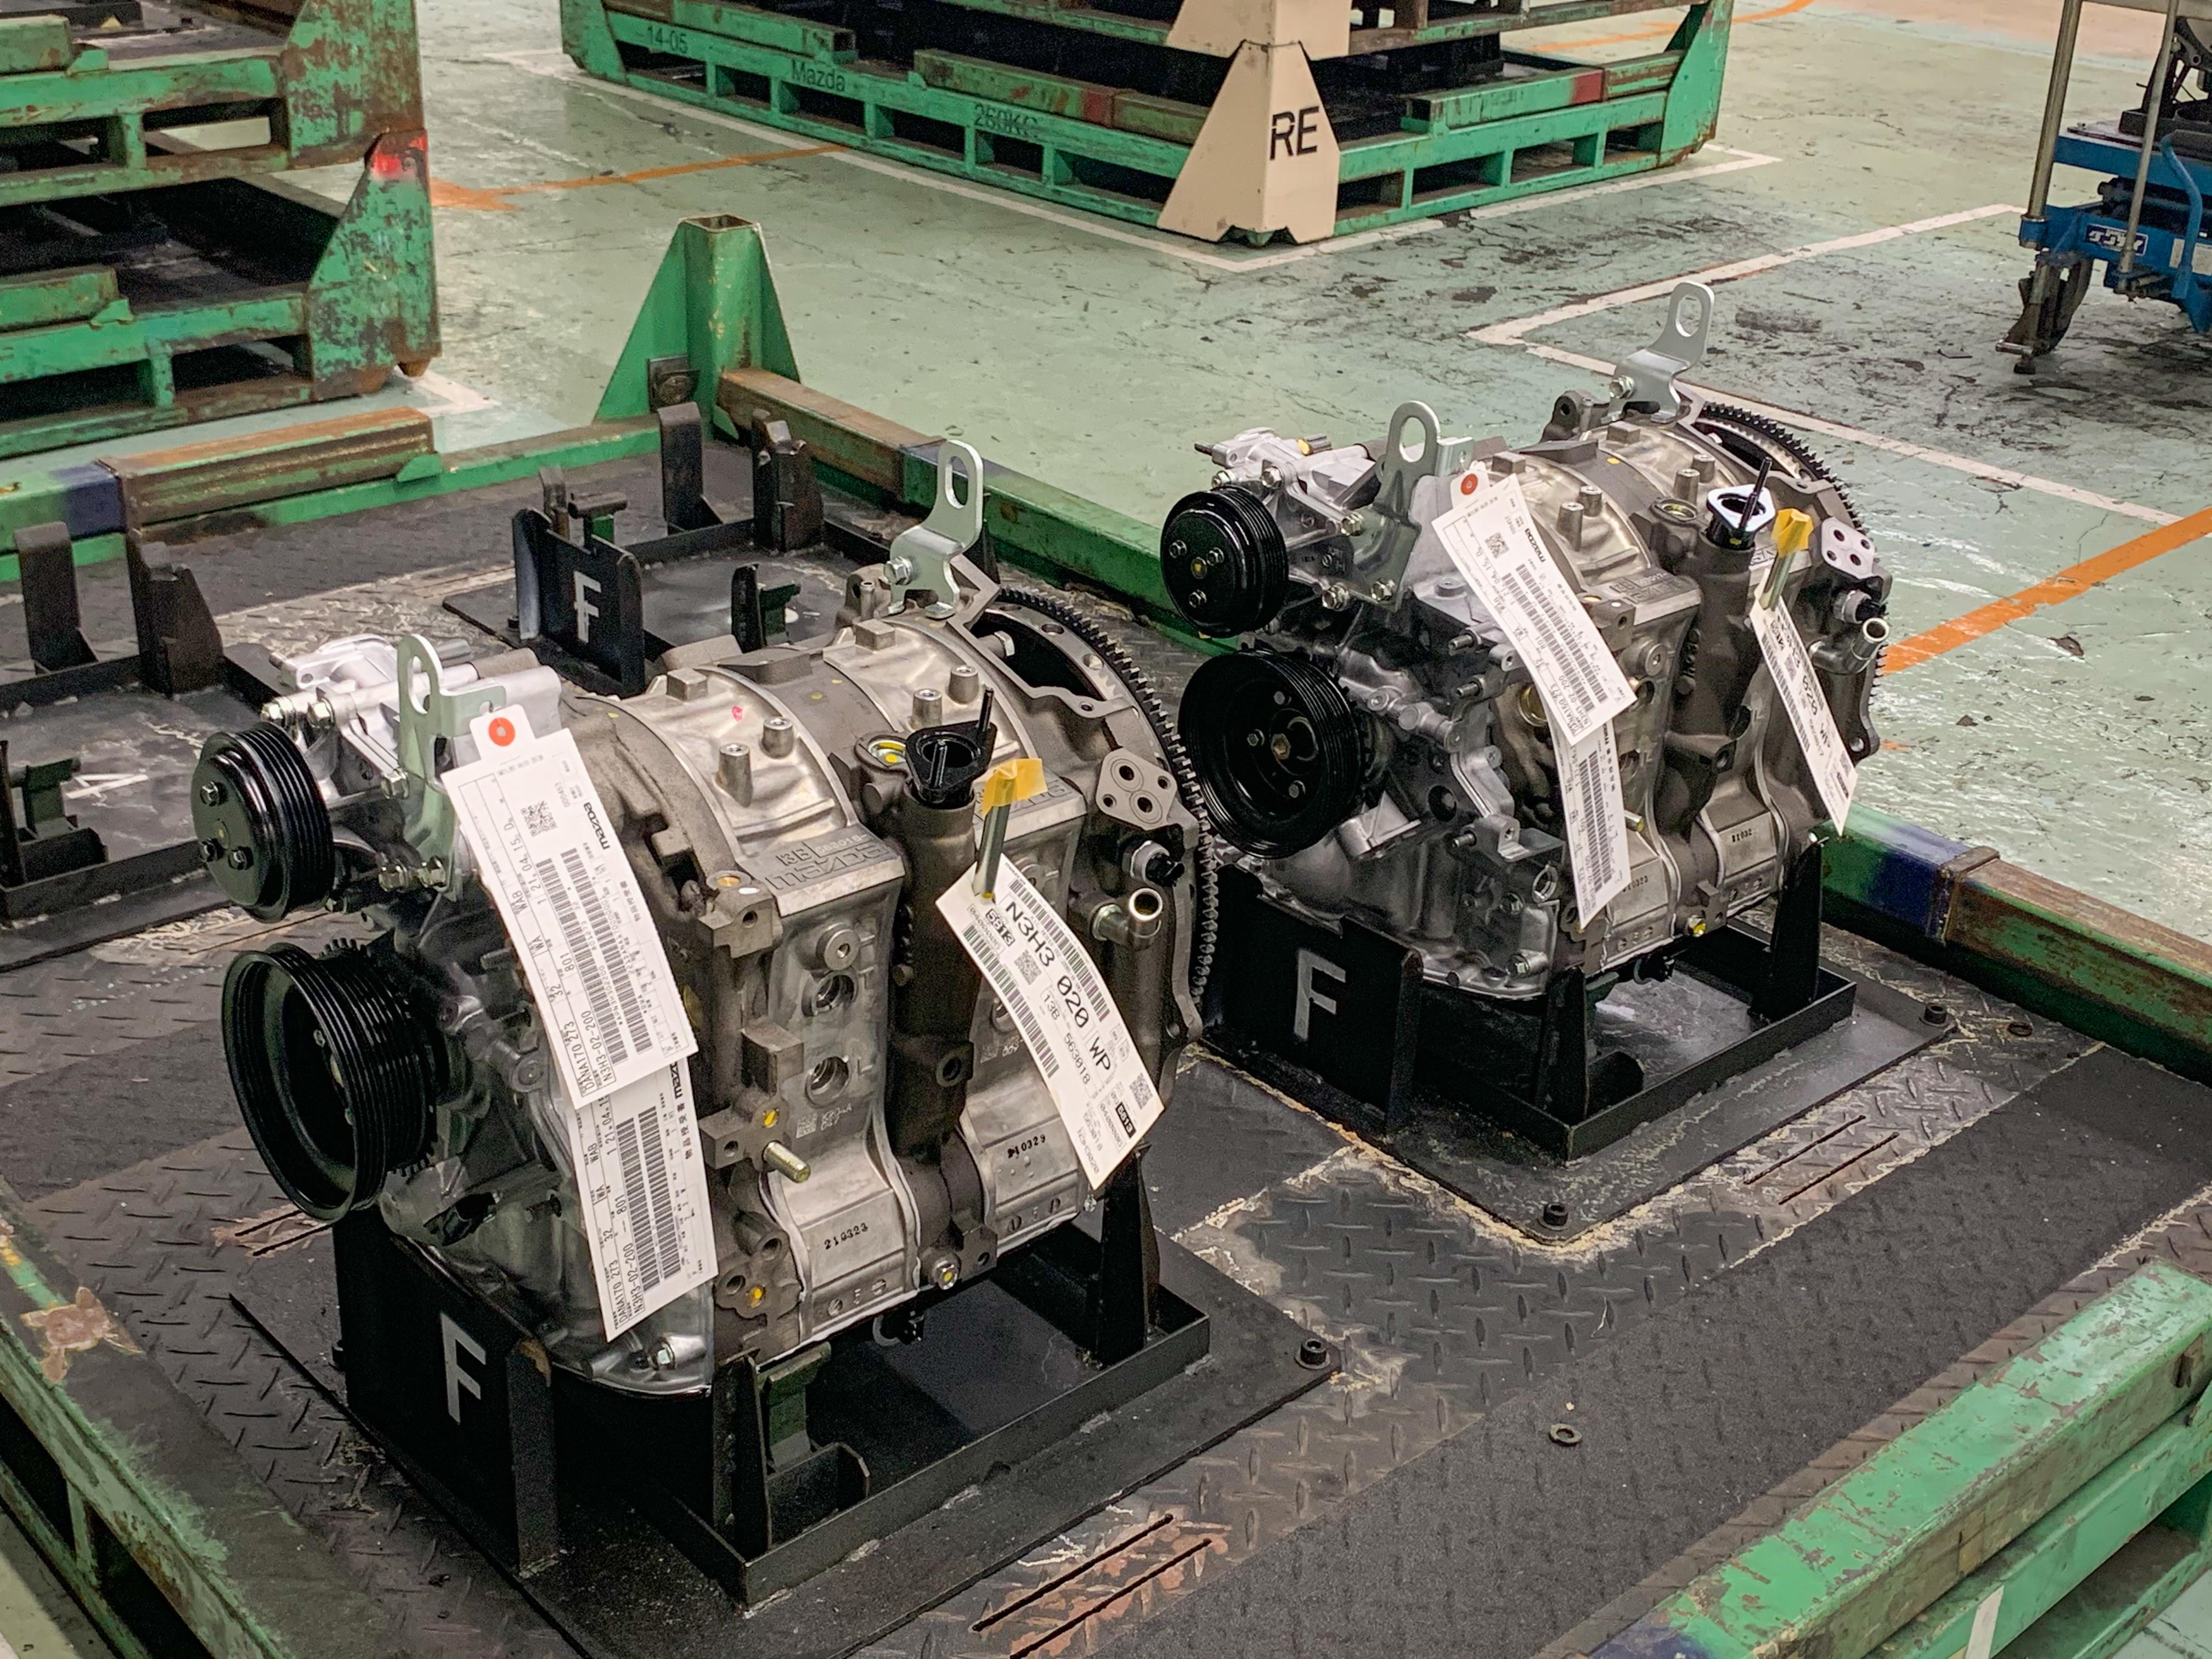 The two 13B rotary engines after assembly.